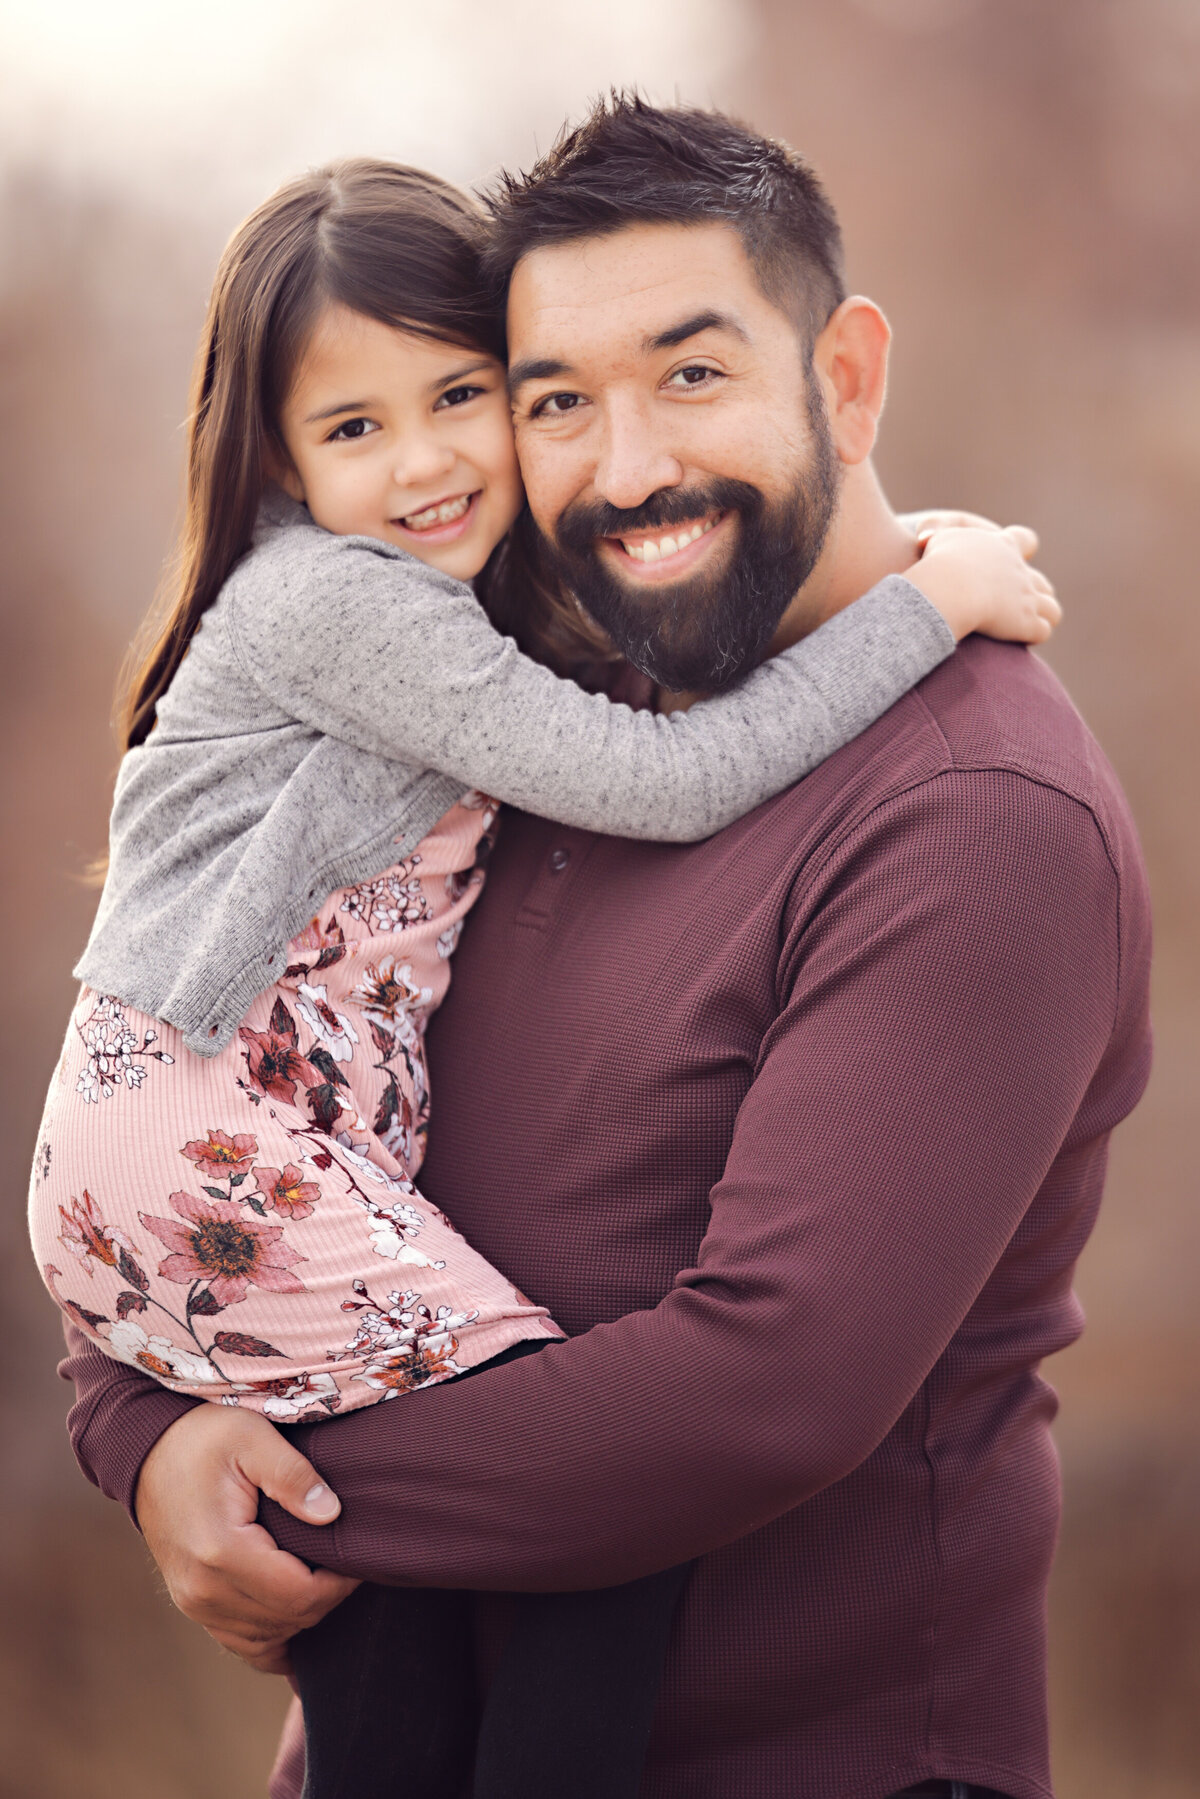 Family-Photos-yvonne-min-photography-dad-daughter-outside-field-golden-hour-sunset-connection-love-thornton-bond-holding-broomfield-north-denver-erie-westminster-canon-session-images-hugs-arvada-boulder-grass-sunlight-girl-dress-connection-portrait-69